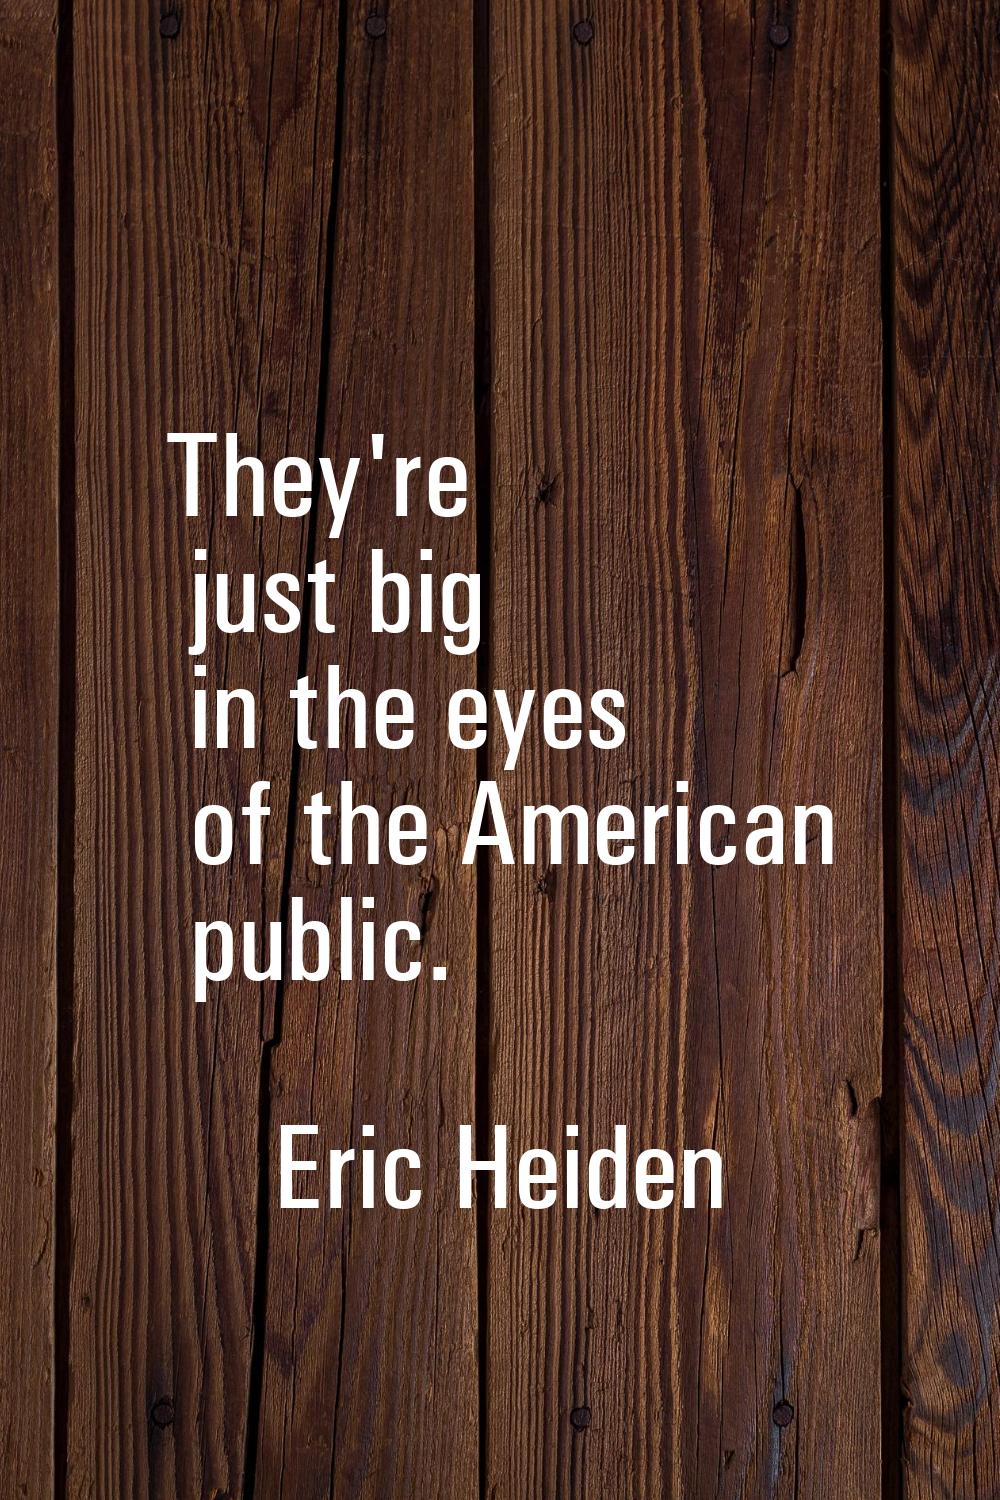 They're just big in the eyes of the American public.